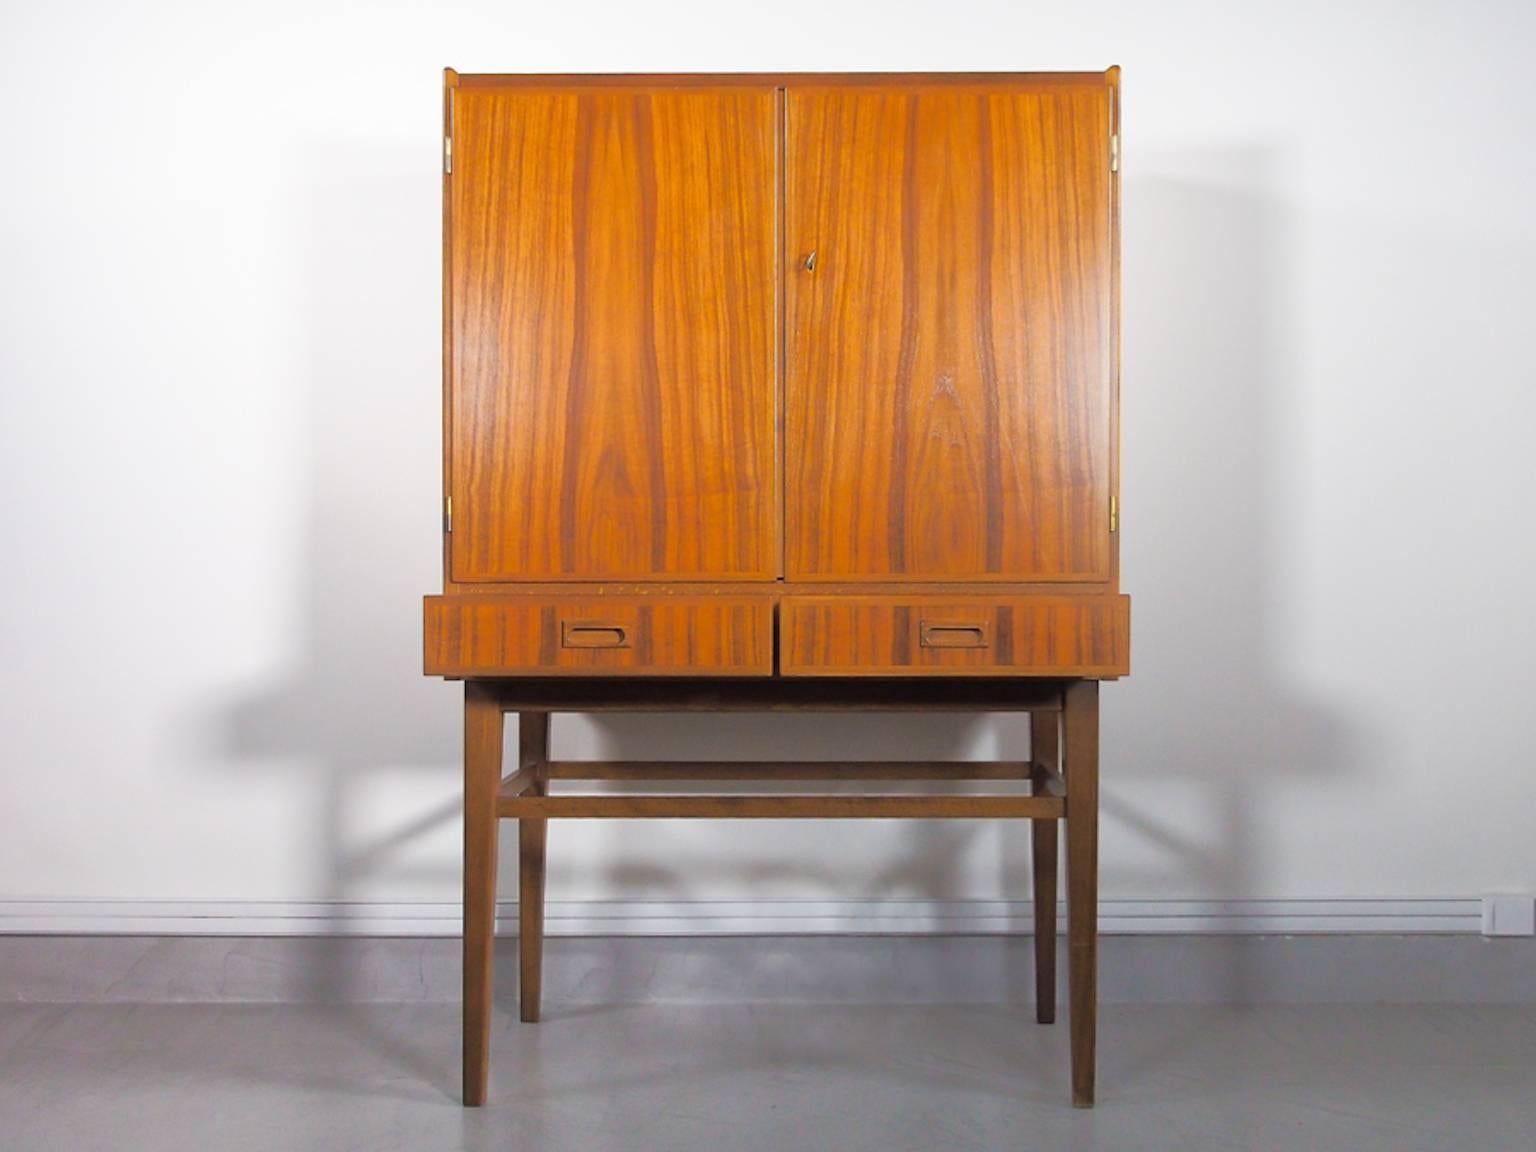 Tall mid-century cocktail cabinet veneered with walnut. Mirrored interior with a glass shelf and a built-in lighting. Underneath, two-drawer and a pull-out table to serve drinks.